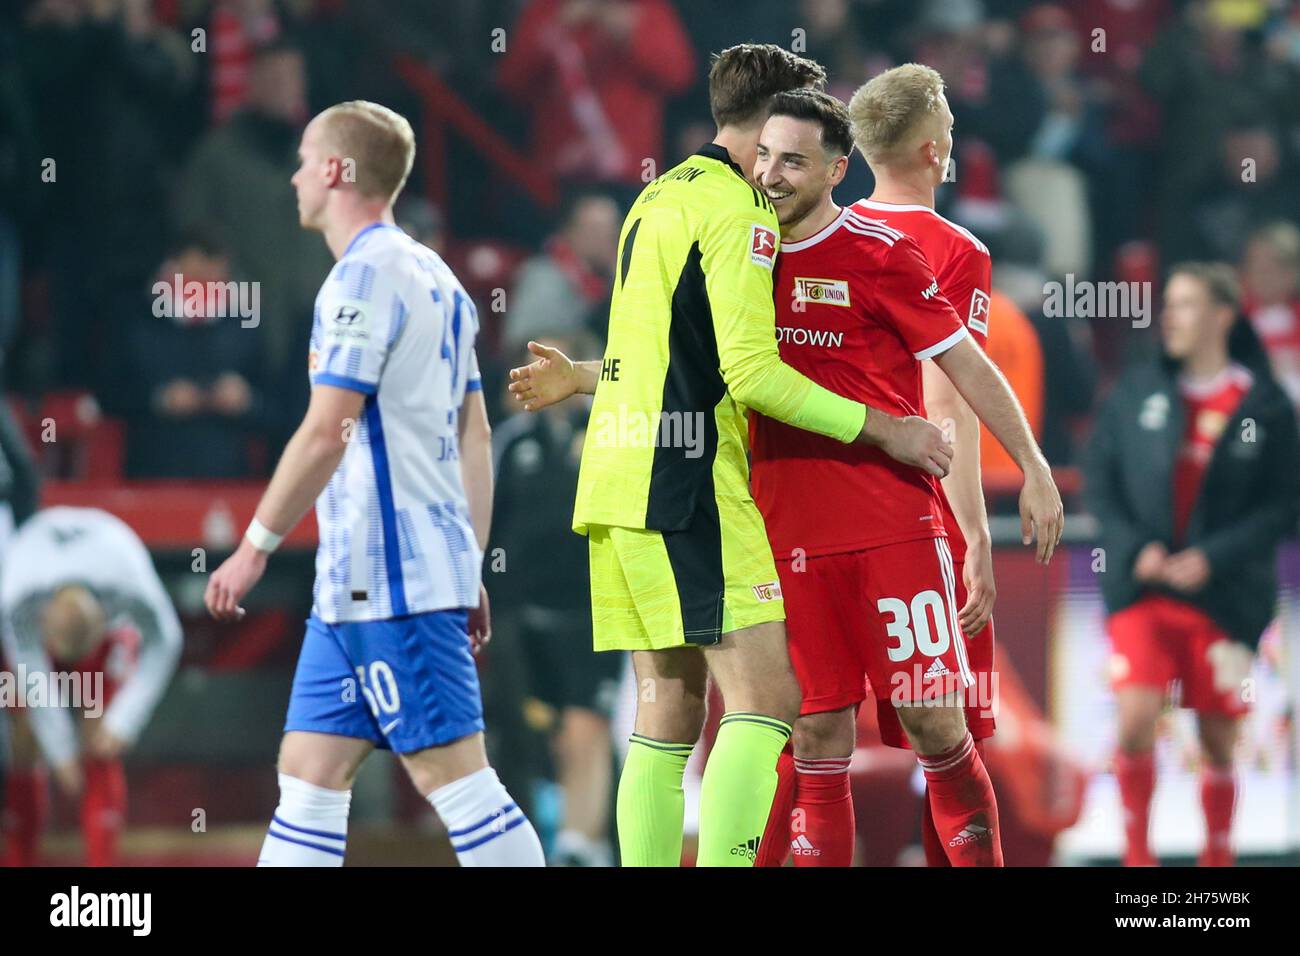 20 November 2021, Berlin: Football: Bundesliga, 1. FC Union Berlin - Hertha BSC, Matchday 12, at the stadium 'An der Alten Försterei'. Union Berlin's Kevin Möhwald (r-l) cheers with Union Berlin's goalkeeper Andreas Luthe after the match, while Hertha's Dennis Jastrzembski walks past them. IMPORTANT NOTE: In accordance with the regulations of the DFL Deutsche Fußball Liga and the DFB Deutscher Fußball-Bund, it is forbidden to exploit or have exploited photographs taken in the stadium and/or of the match in the form of sequence pictures and/or video-like photo series. Photo: Andreas Gora/dpa - Stock Photo